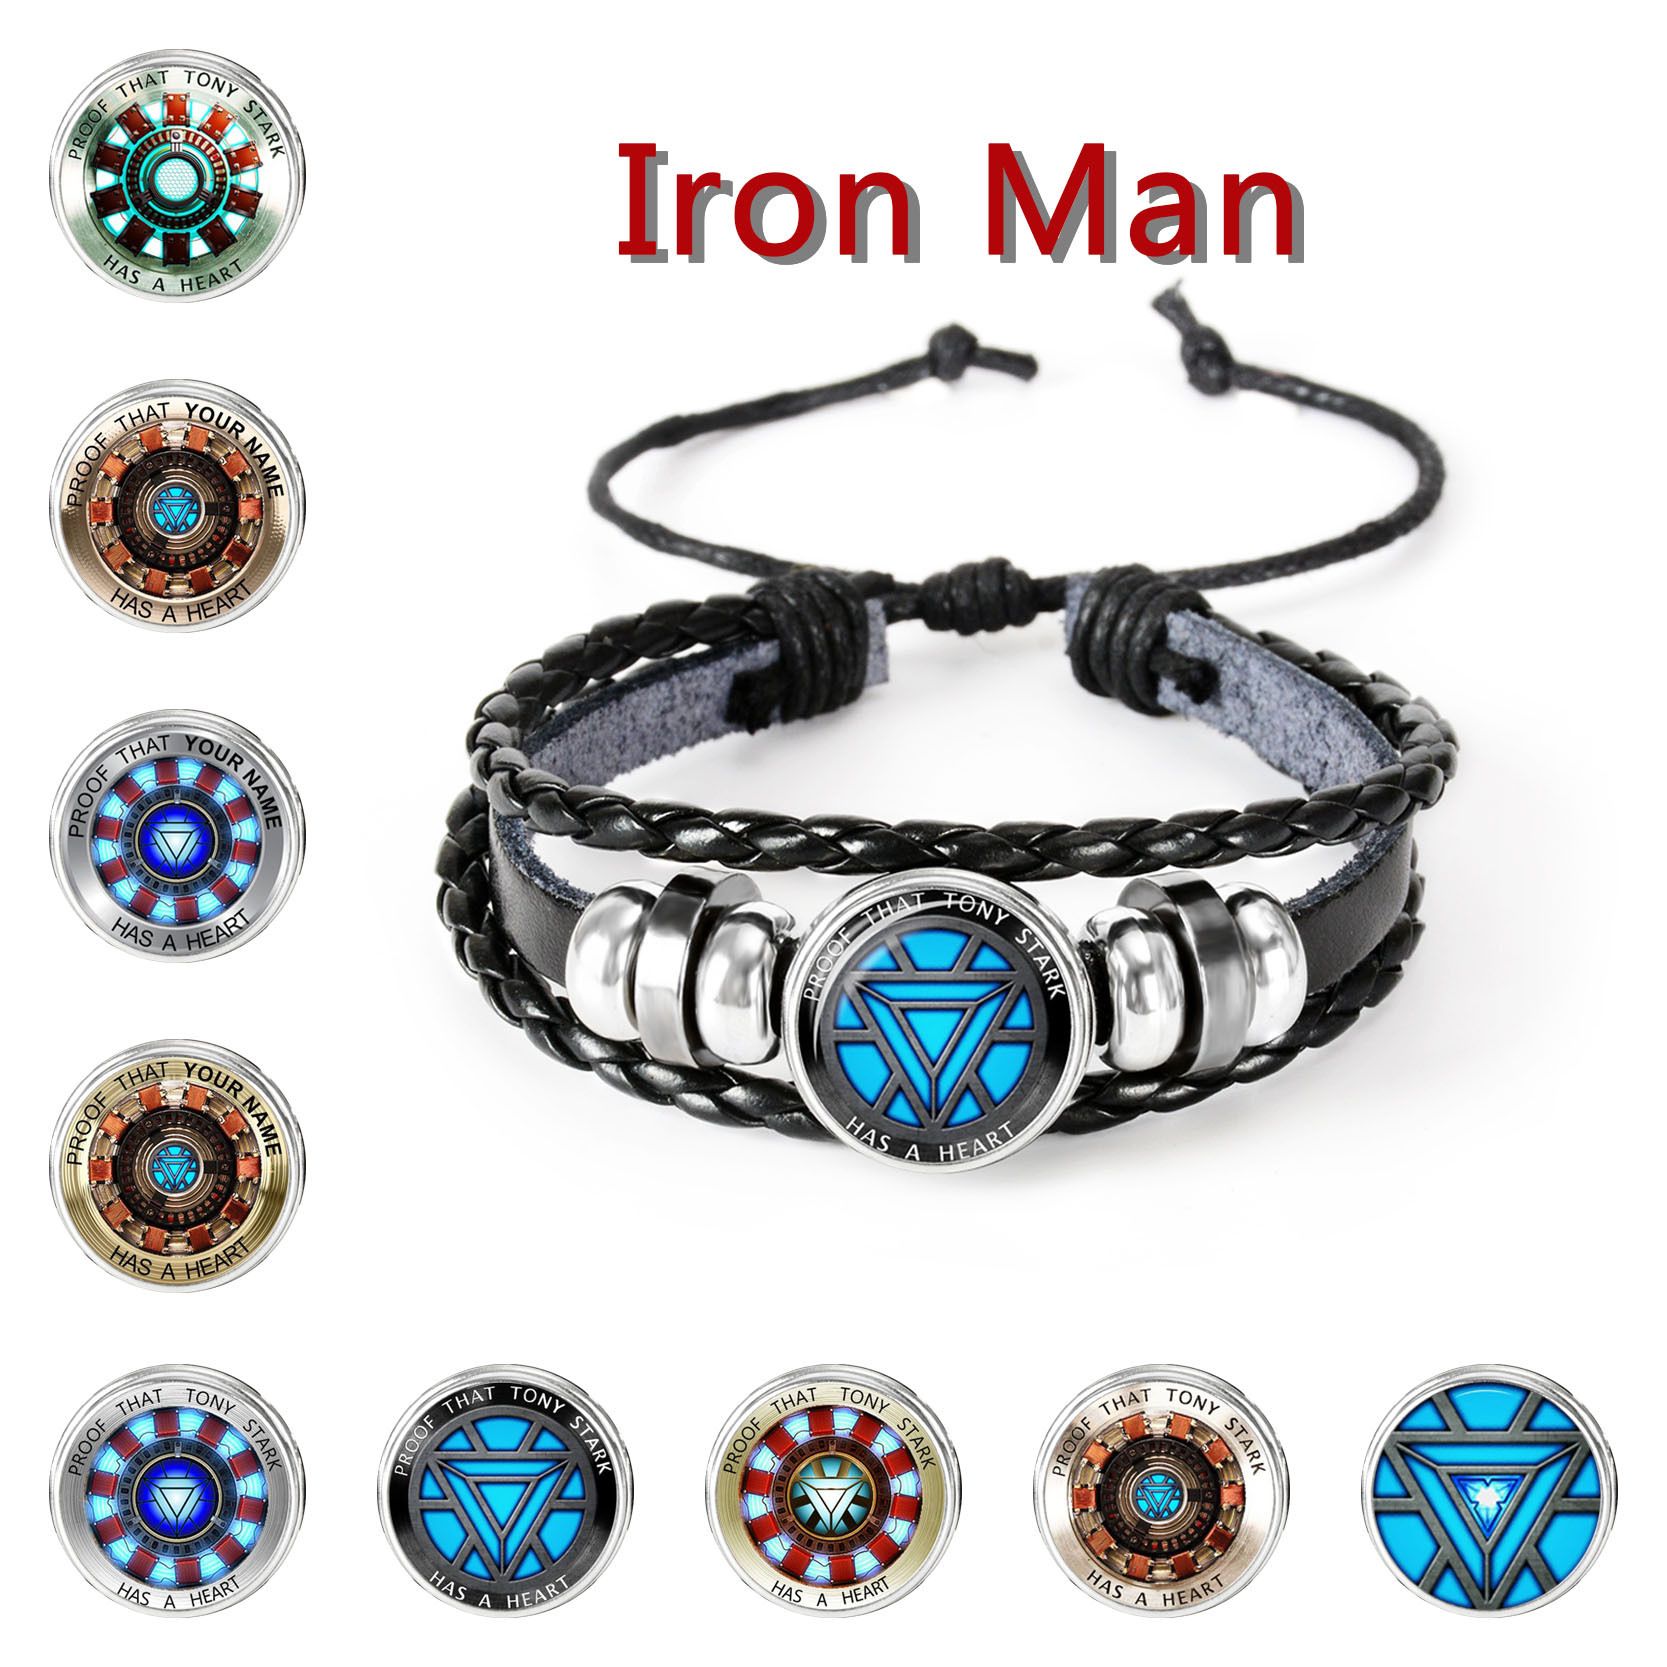 Iron Man Arc Reactor Chest Ring ( 76mm / 3in ) (HML2JKDJE) by craftprops